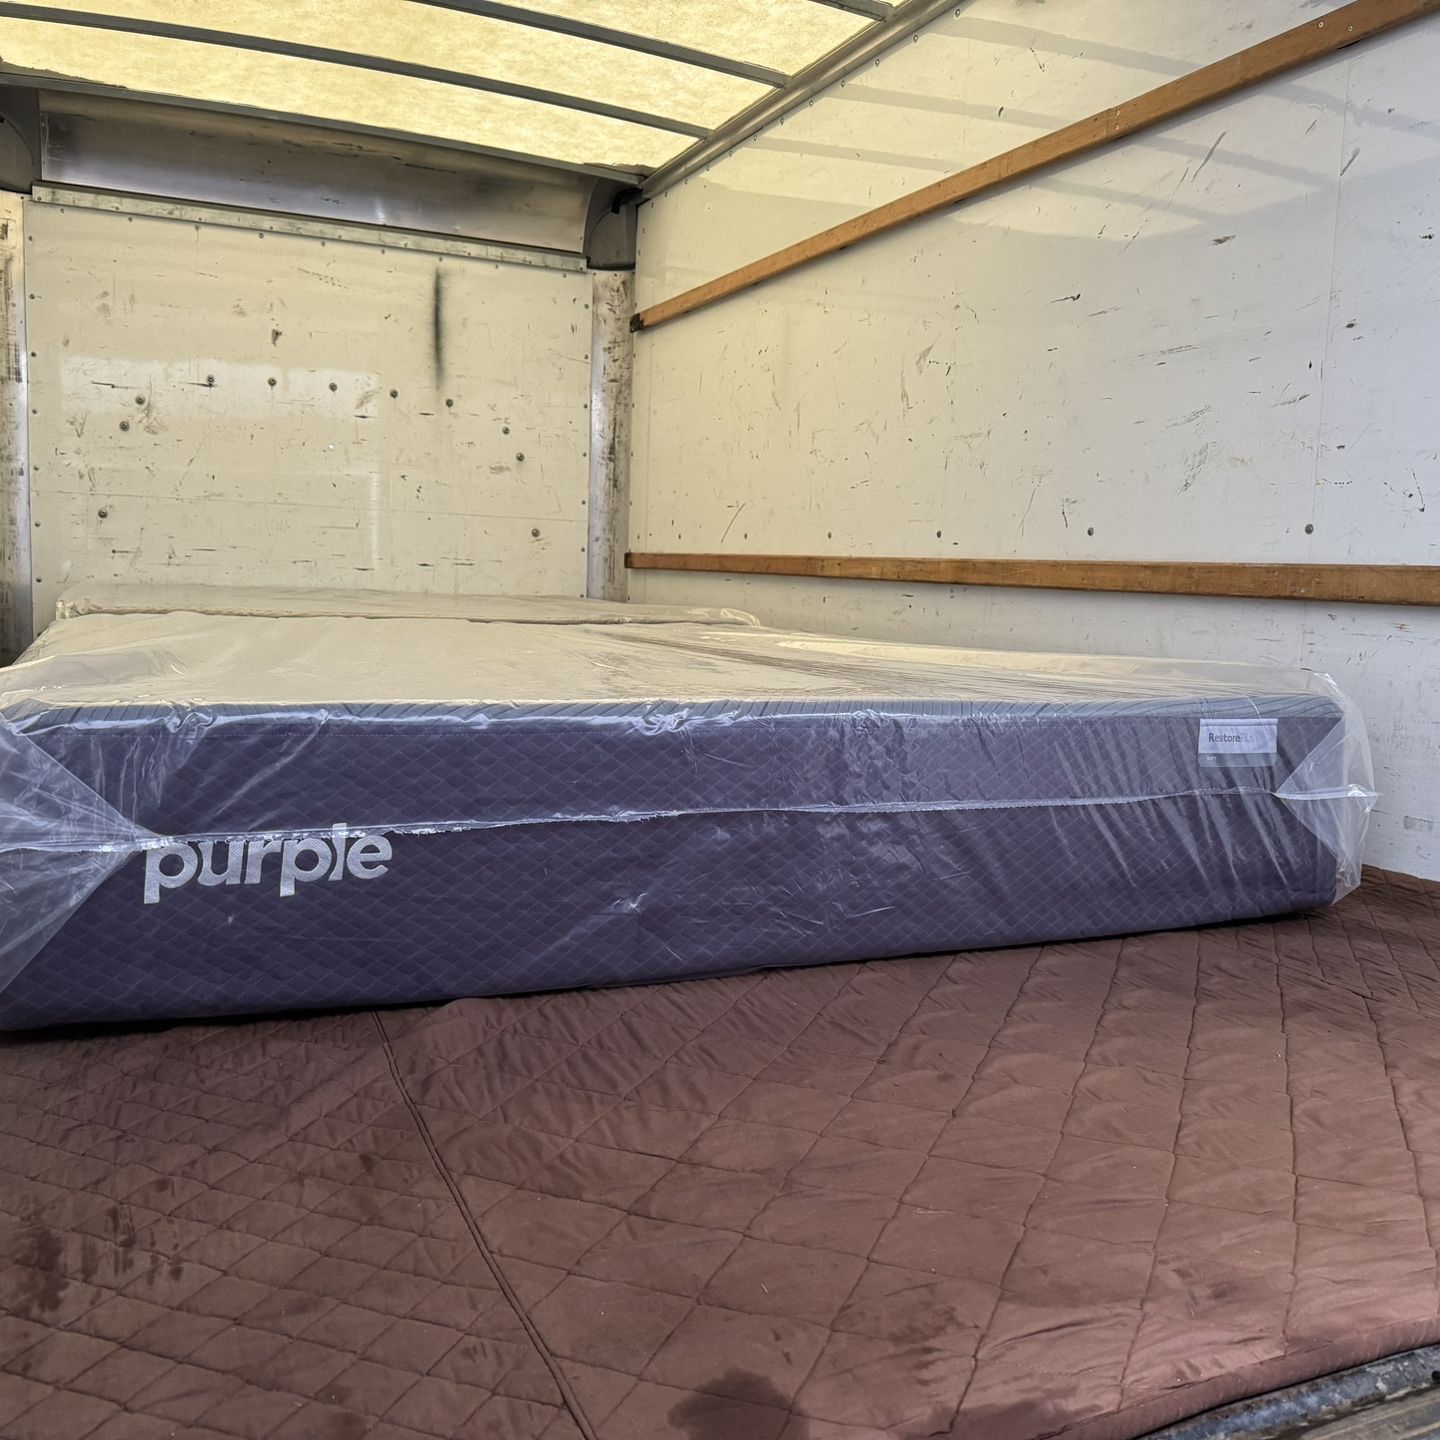 King Purple Restore Plus Mattress (Delivery Is Available)